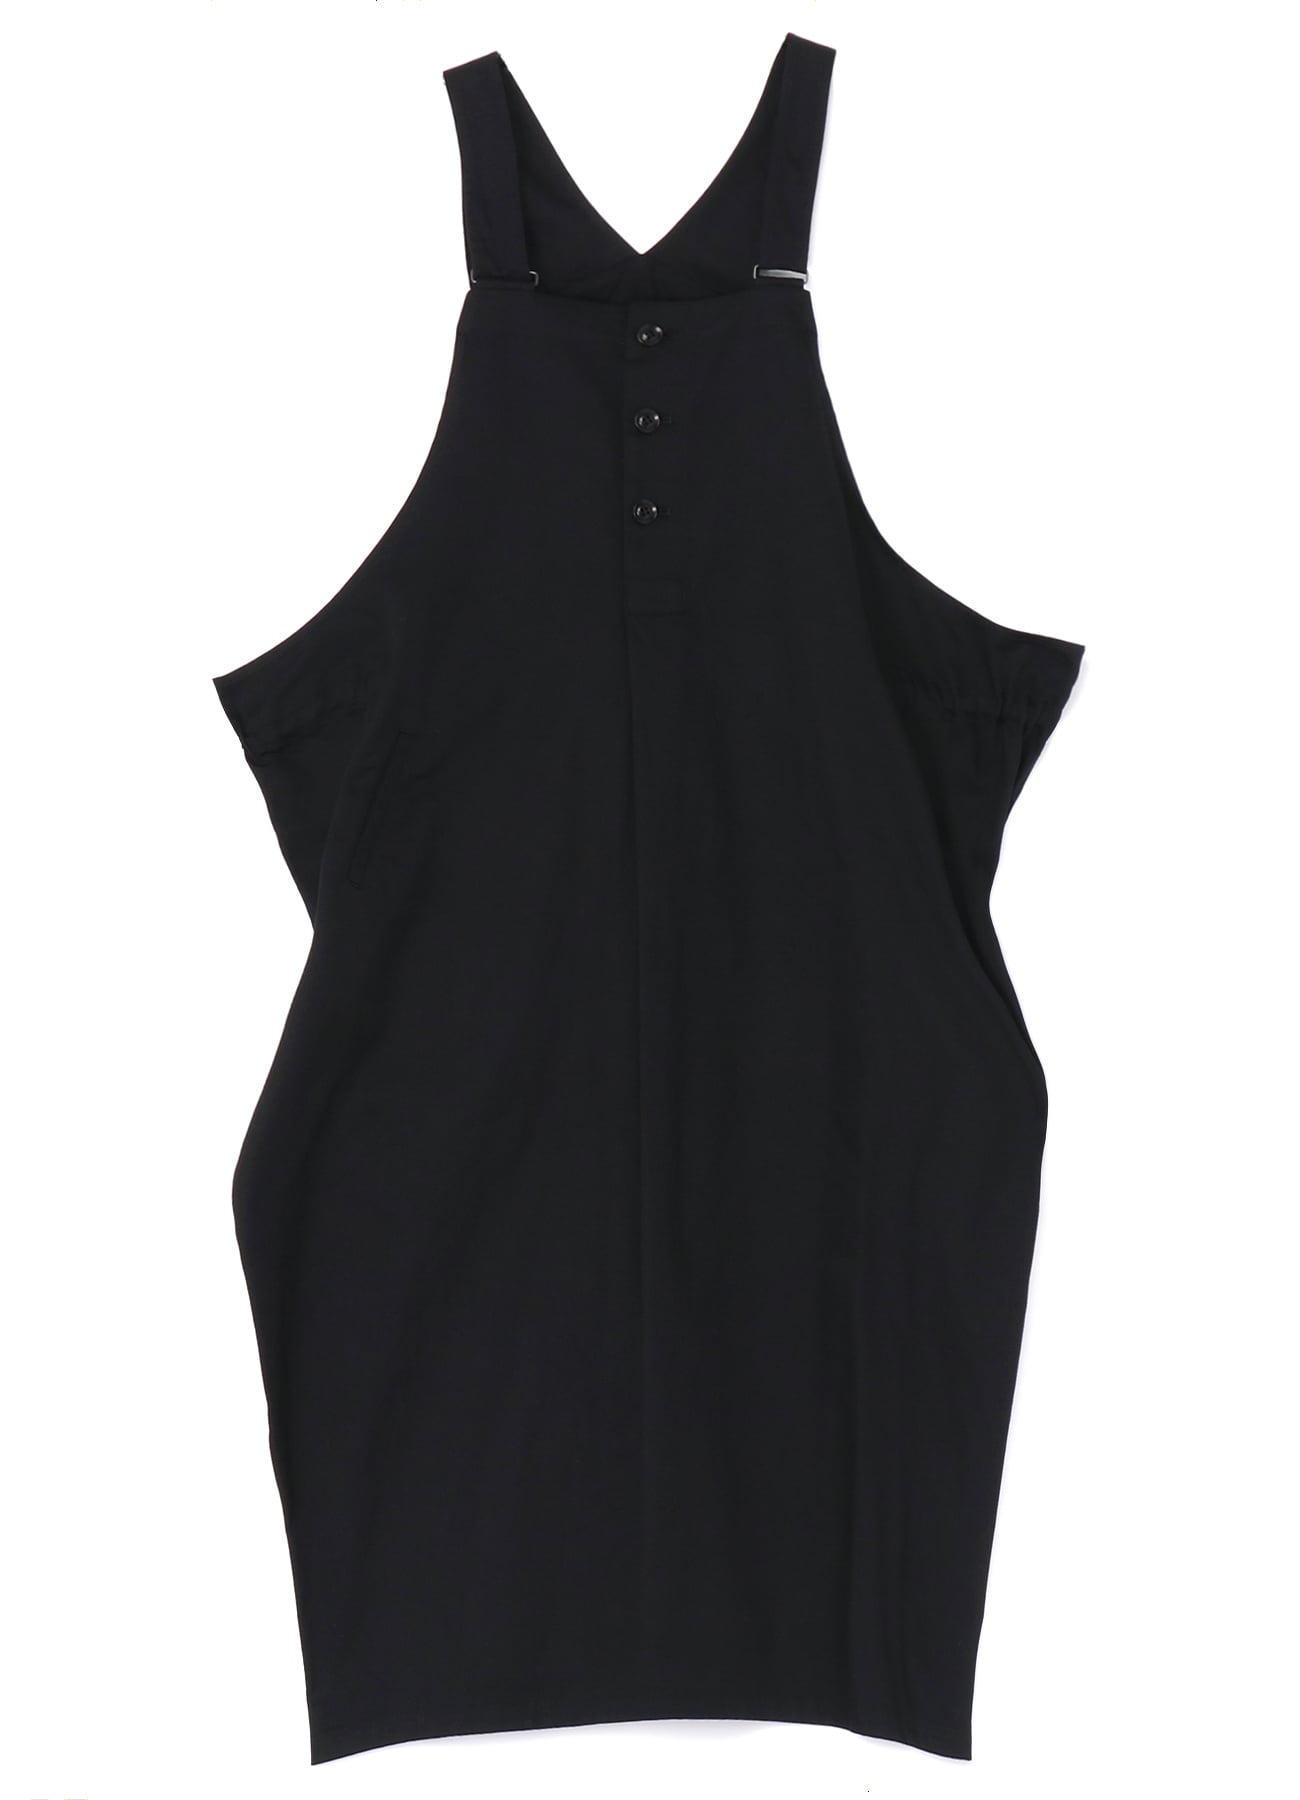 [Y's BORN PRODUCT] COTTON TWILL SIDE STRAP DRESS